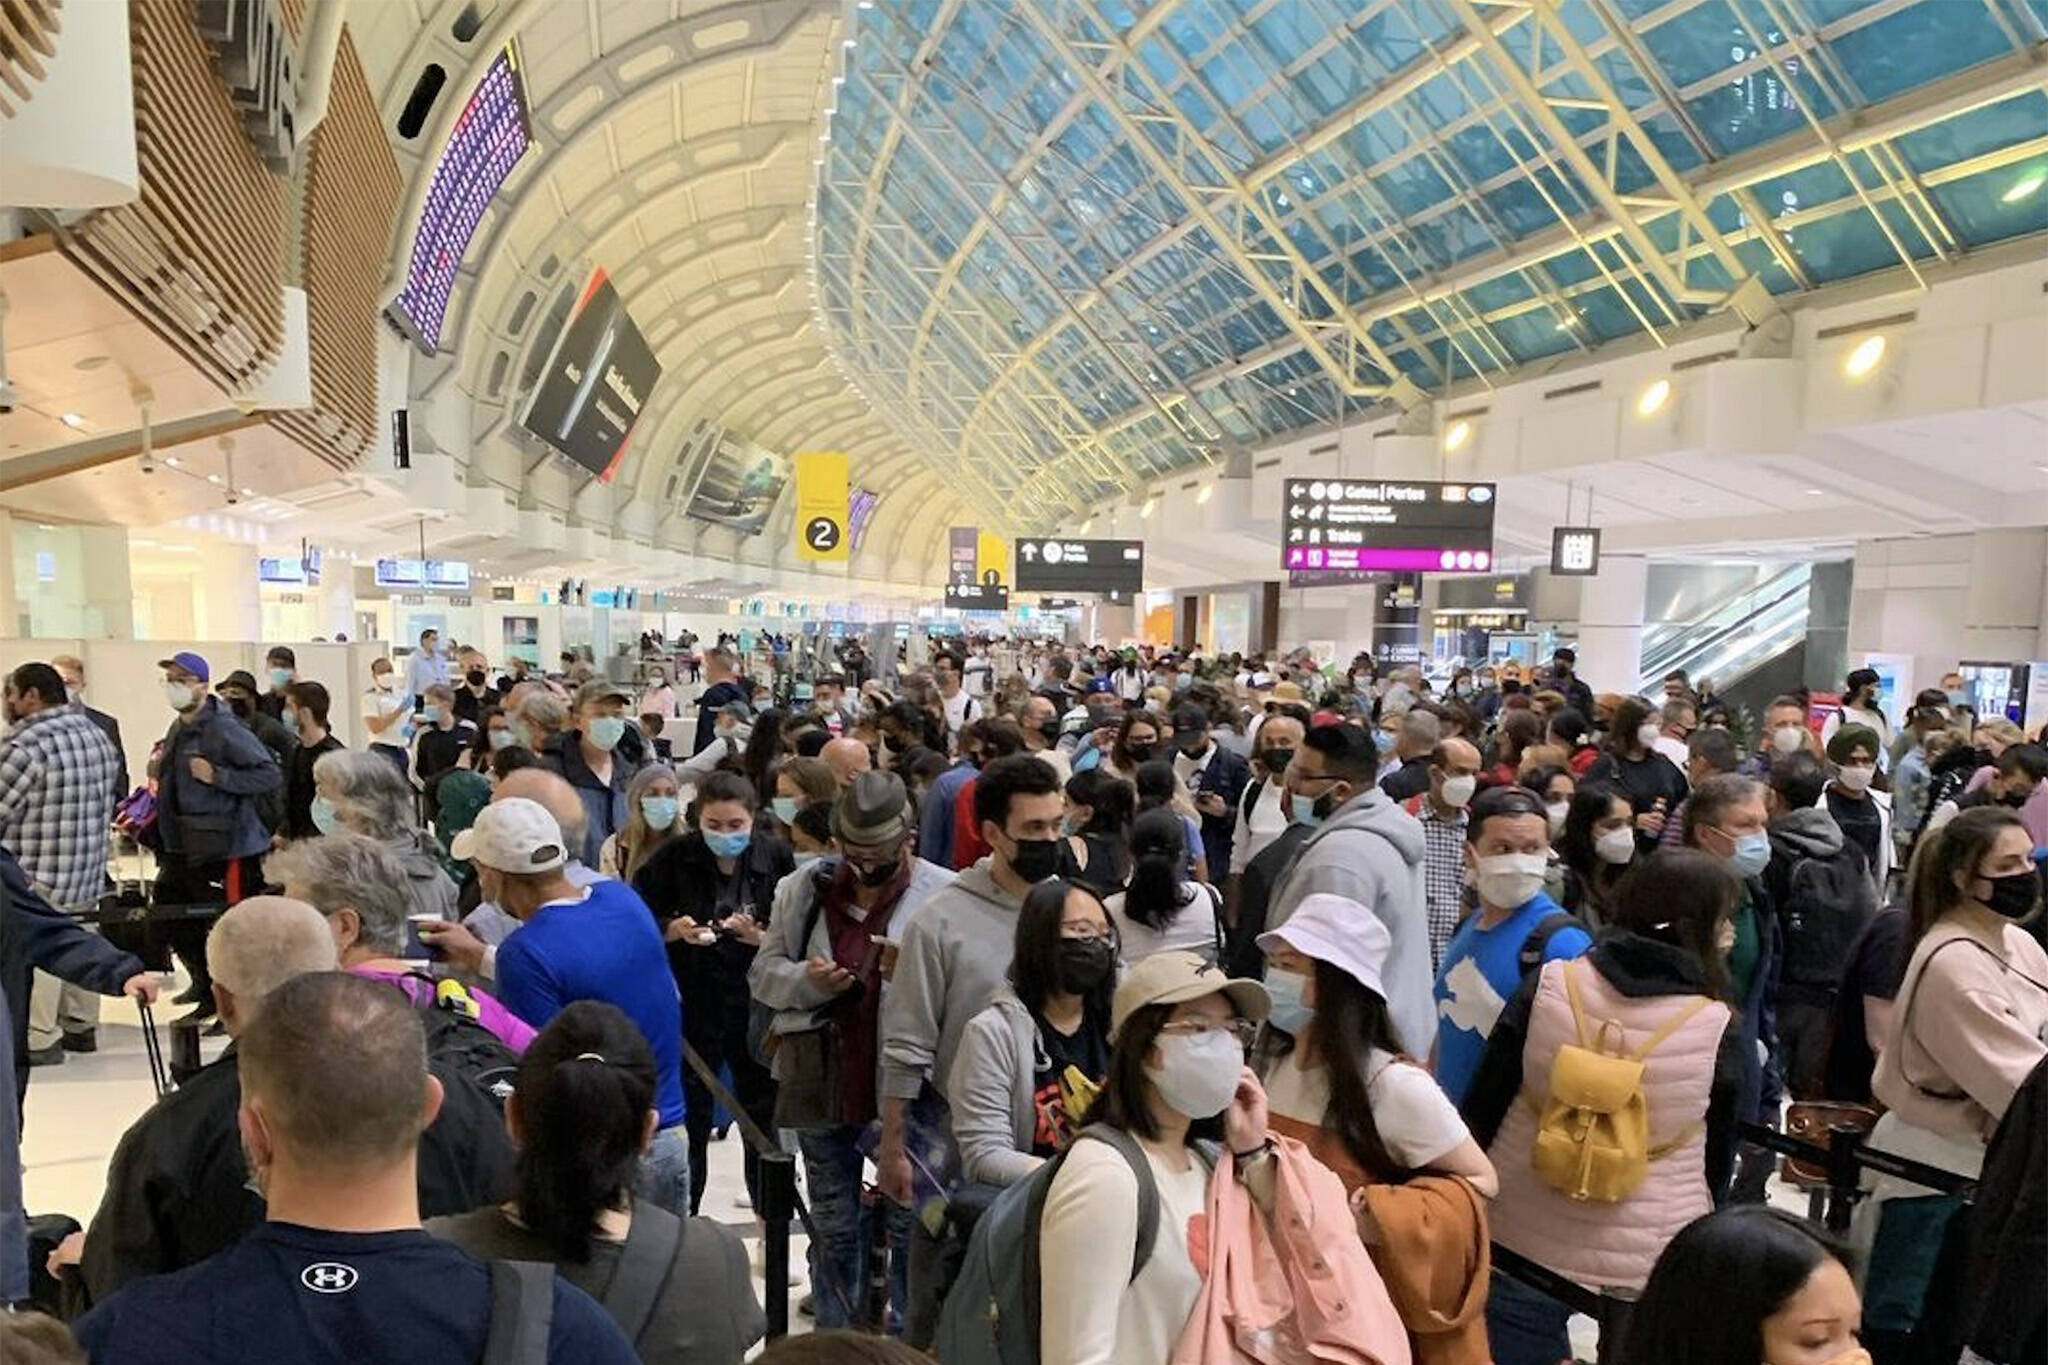 This is what the Toronto airport looked like this week as brutal waits  continue